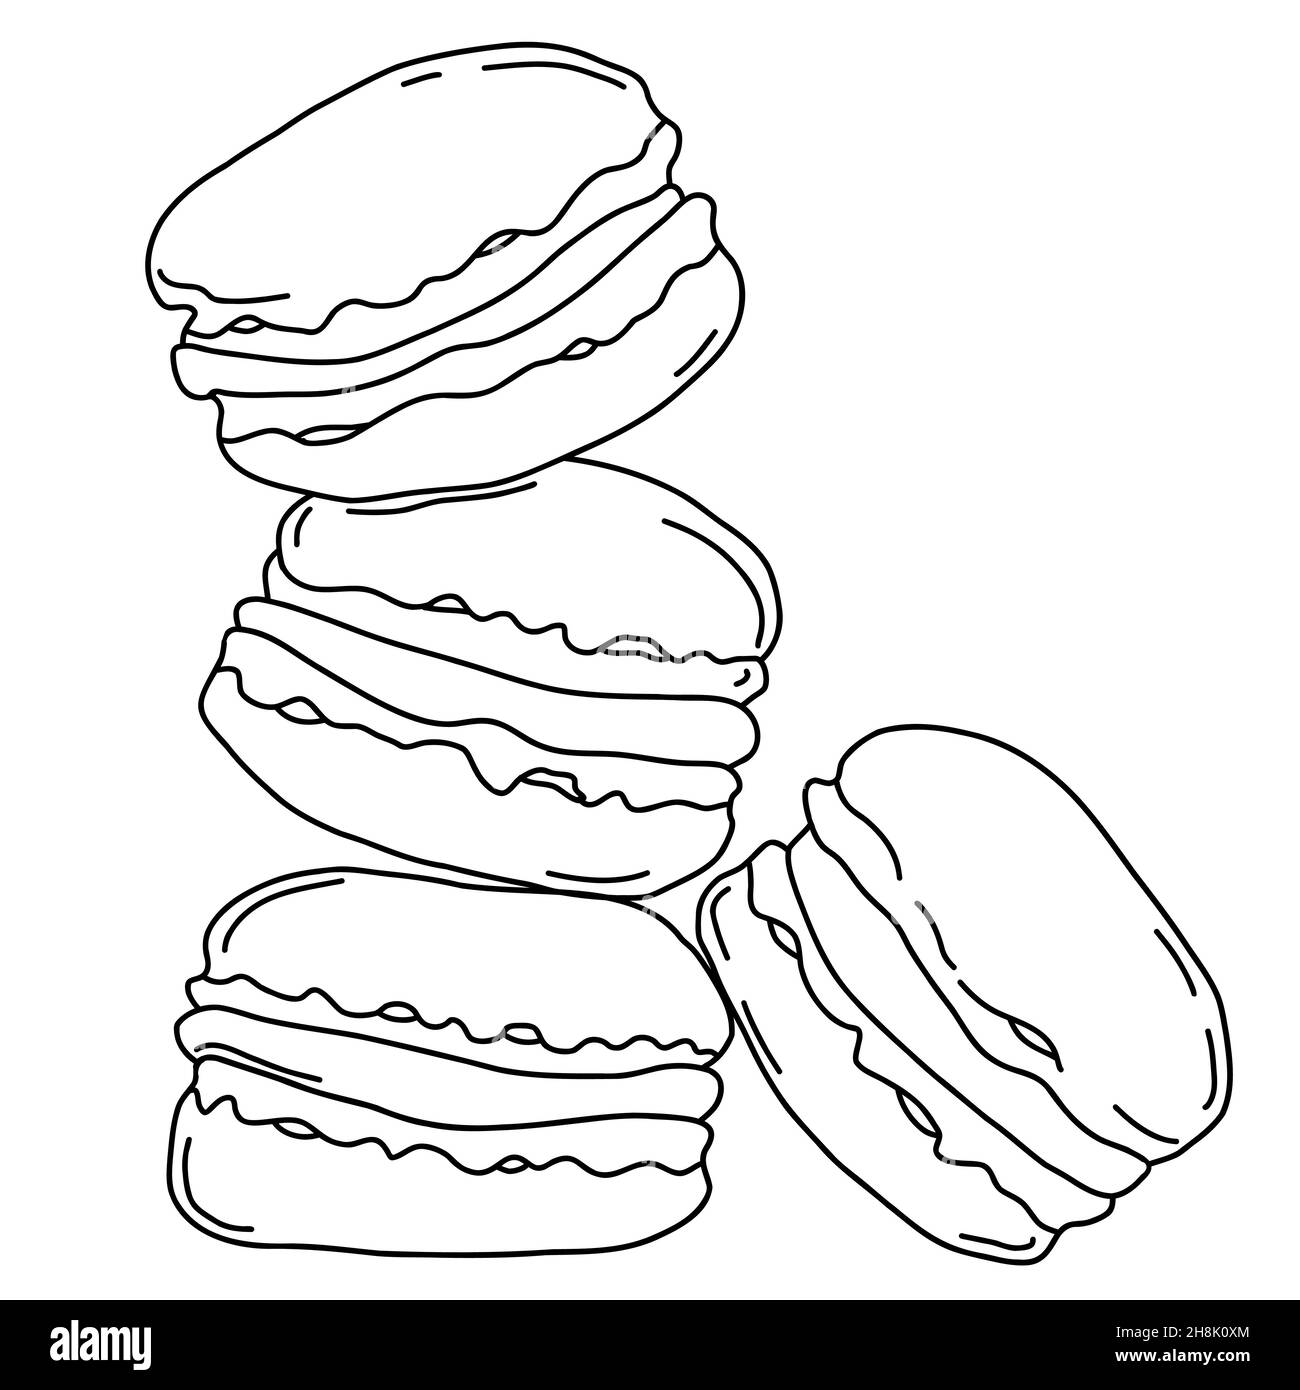 Macoroon cookies. large stack of desserts. Vector illustration. Linear outline drawing Stock Vector